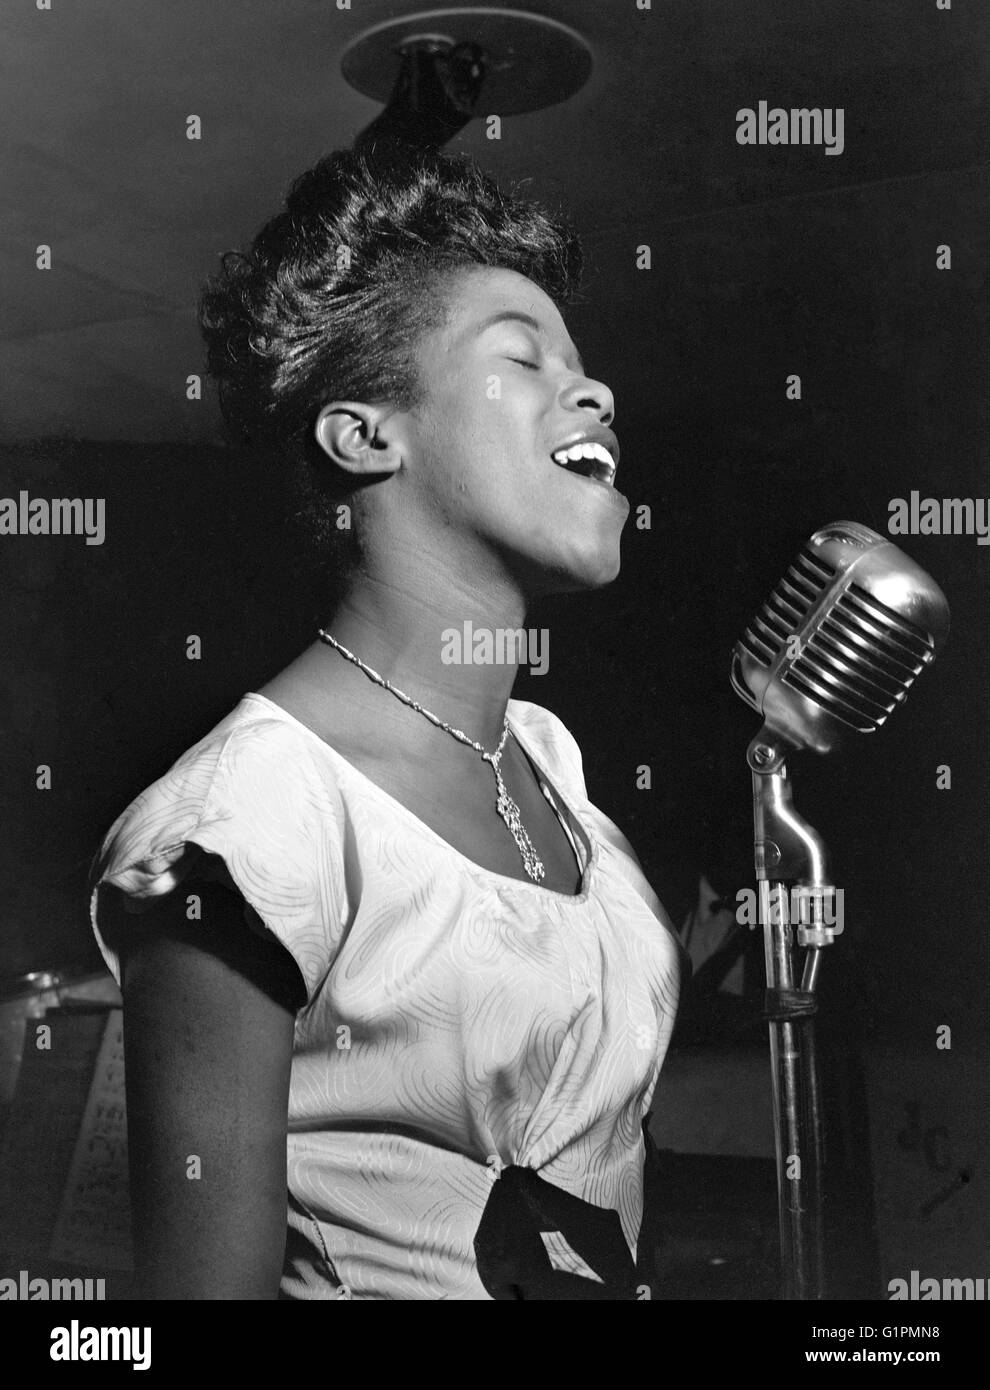 SARAH VAUGHAN (1924-1990).  American singer. At the Cafe Society in New York City. Photograph by William P. Gottlieb, 1946. Stock Photo